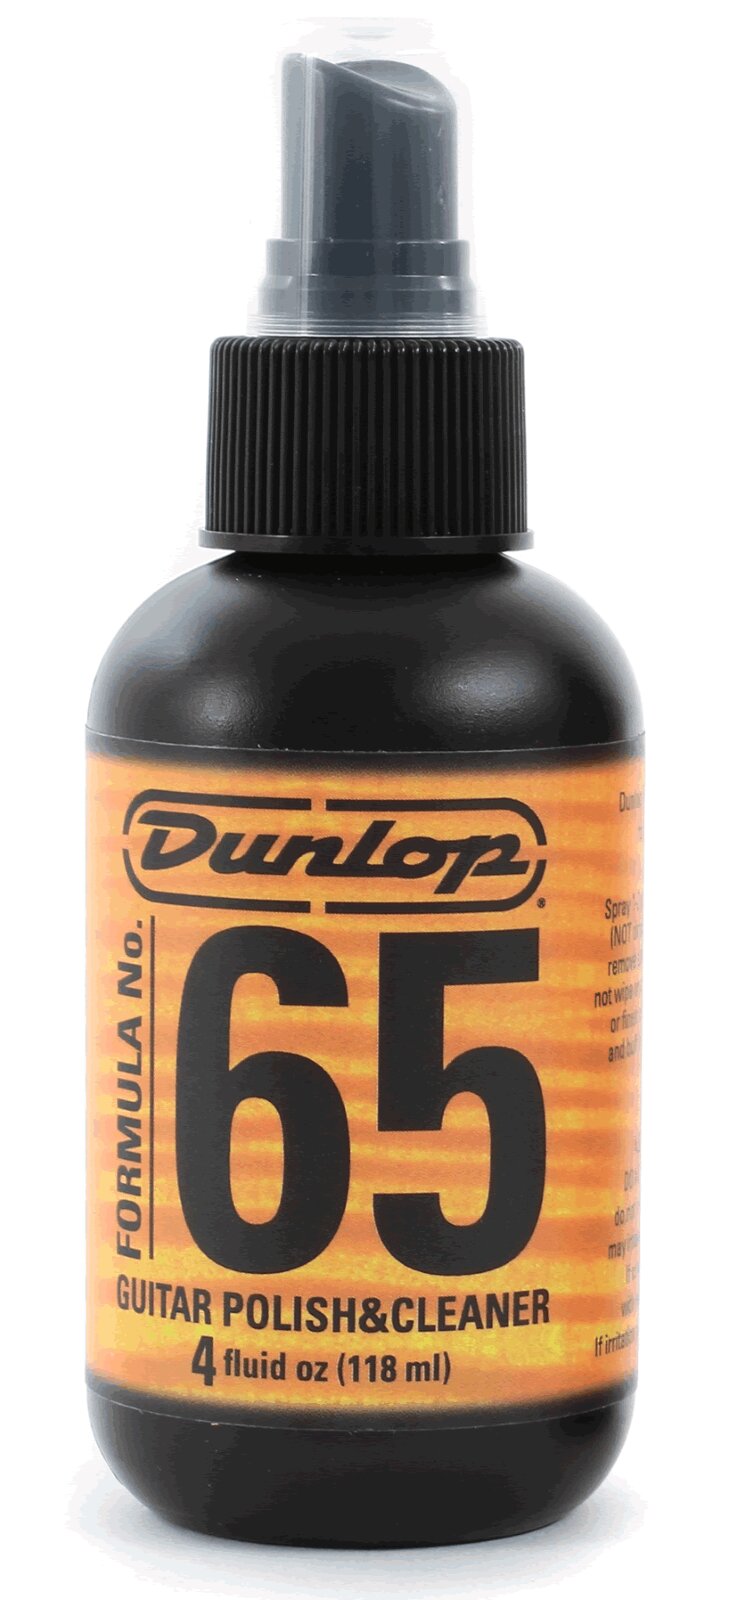 Dunlop Formula 65 / 654 Guitar polish and cleaner in spray 118ml : photo 1